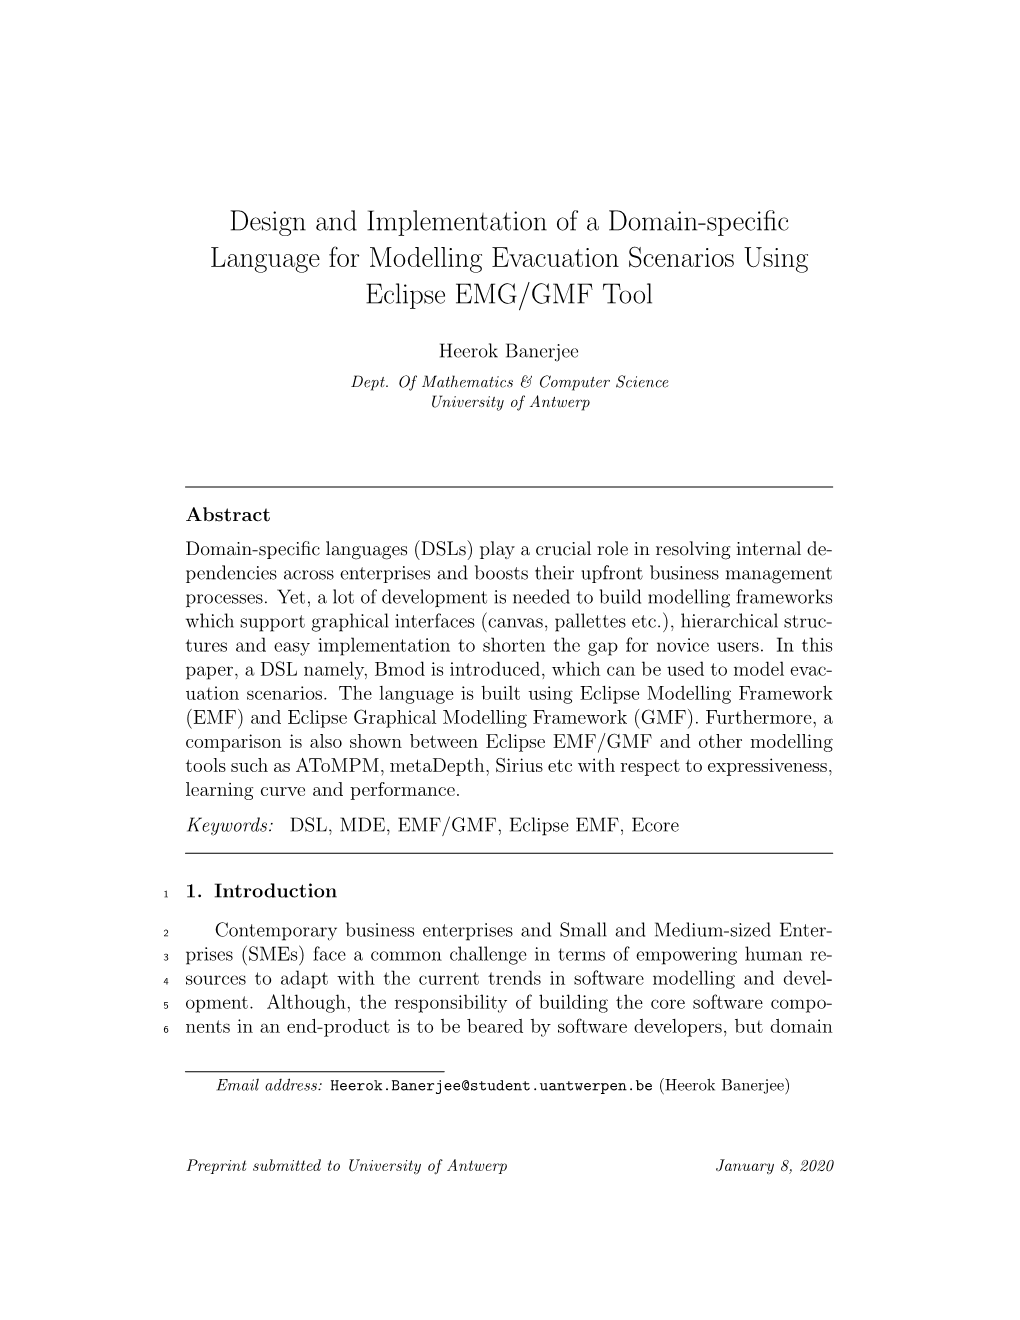 Design and Implementation of a Domain-Specific Language For